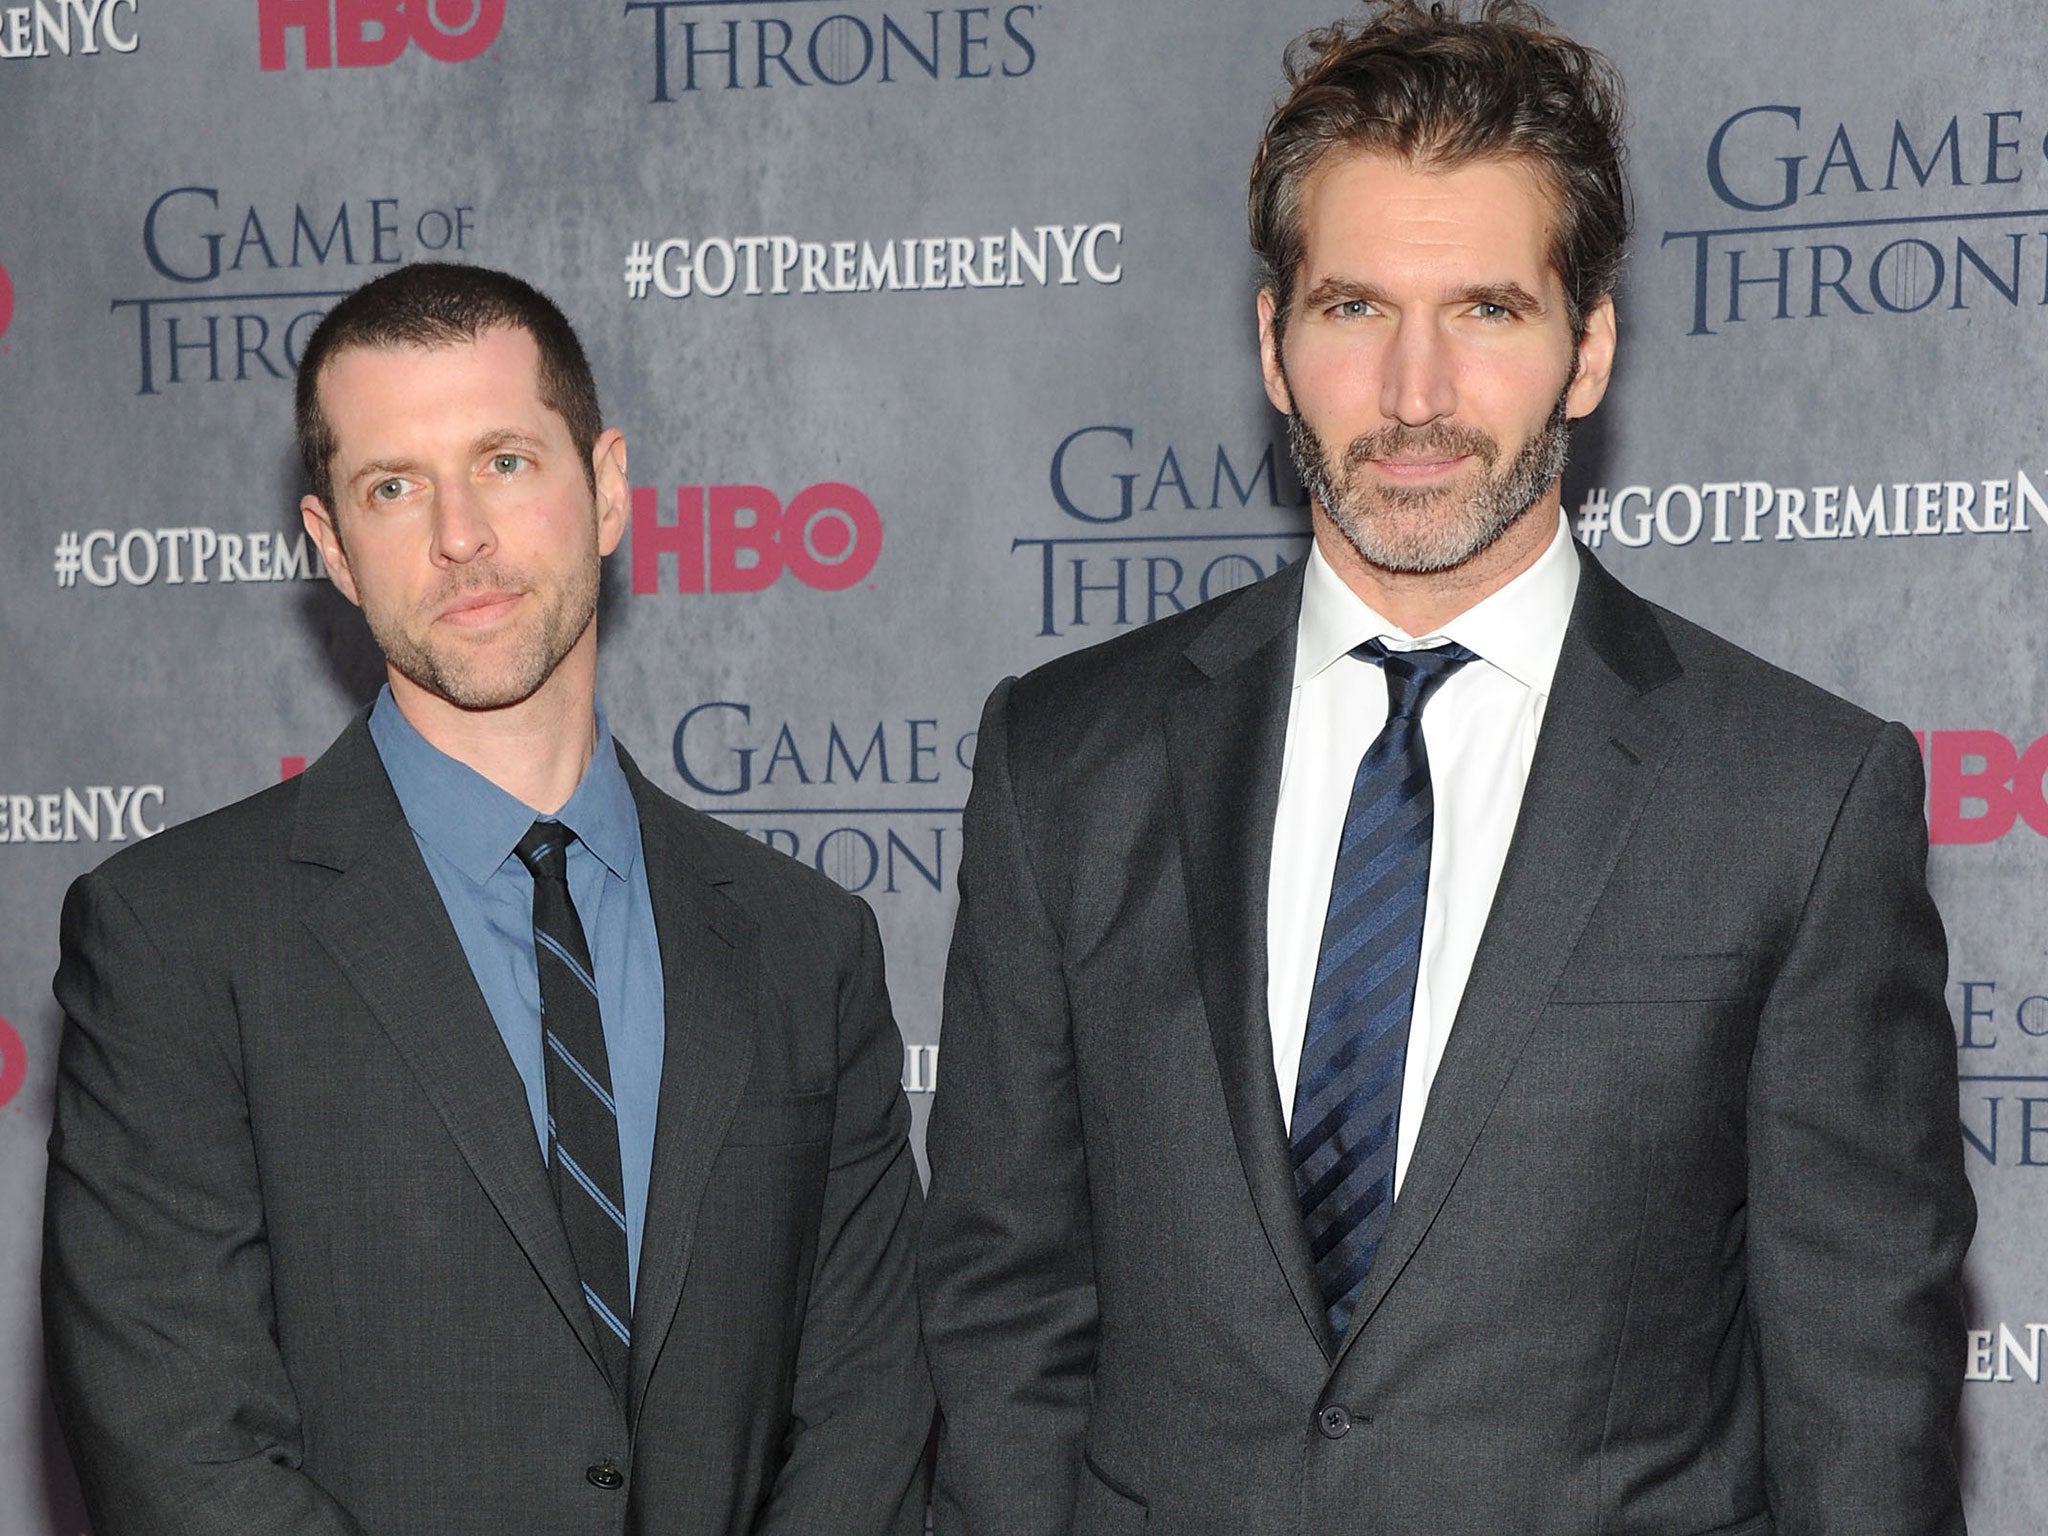 DB Weiss and David Benioff are almost certainly spoiling George RR Martin's next books in Game of Thrones